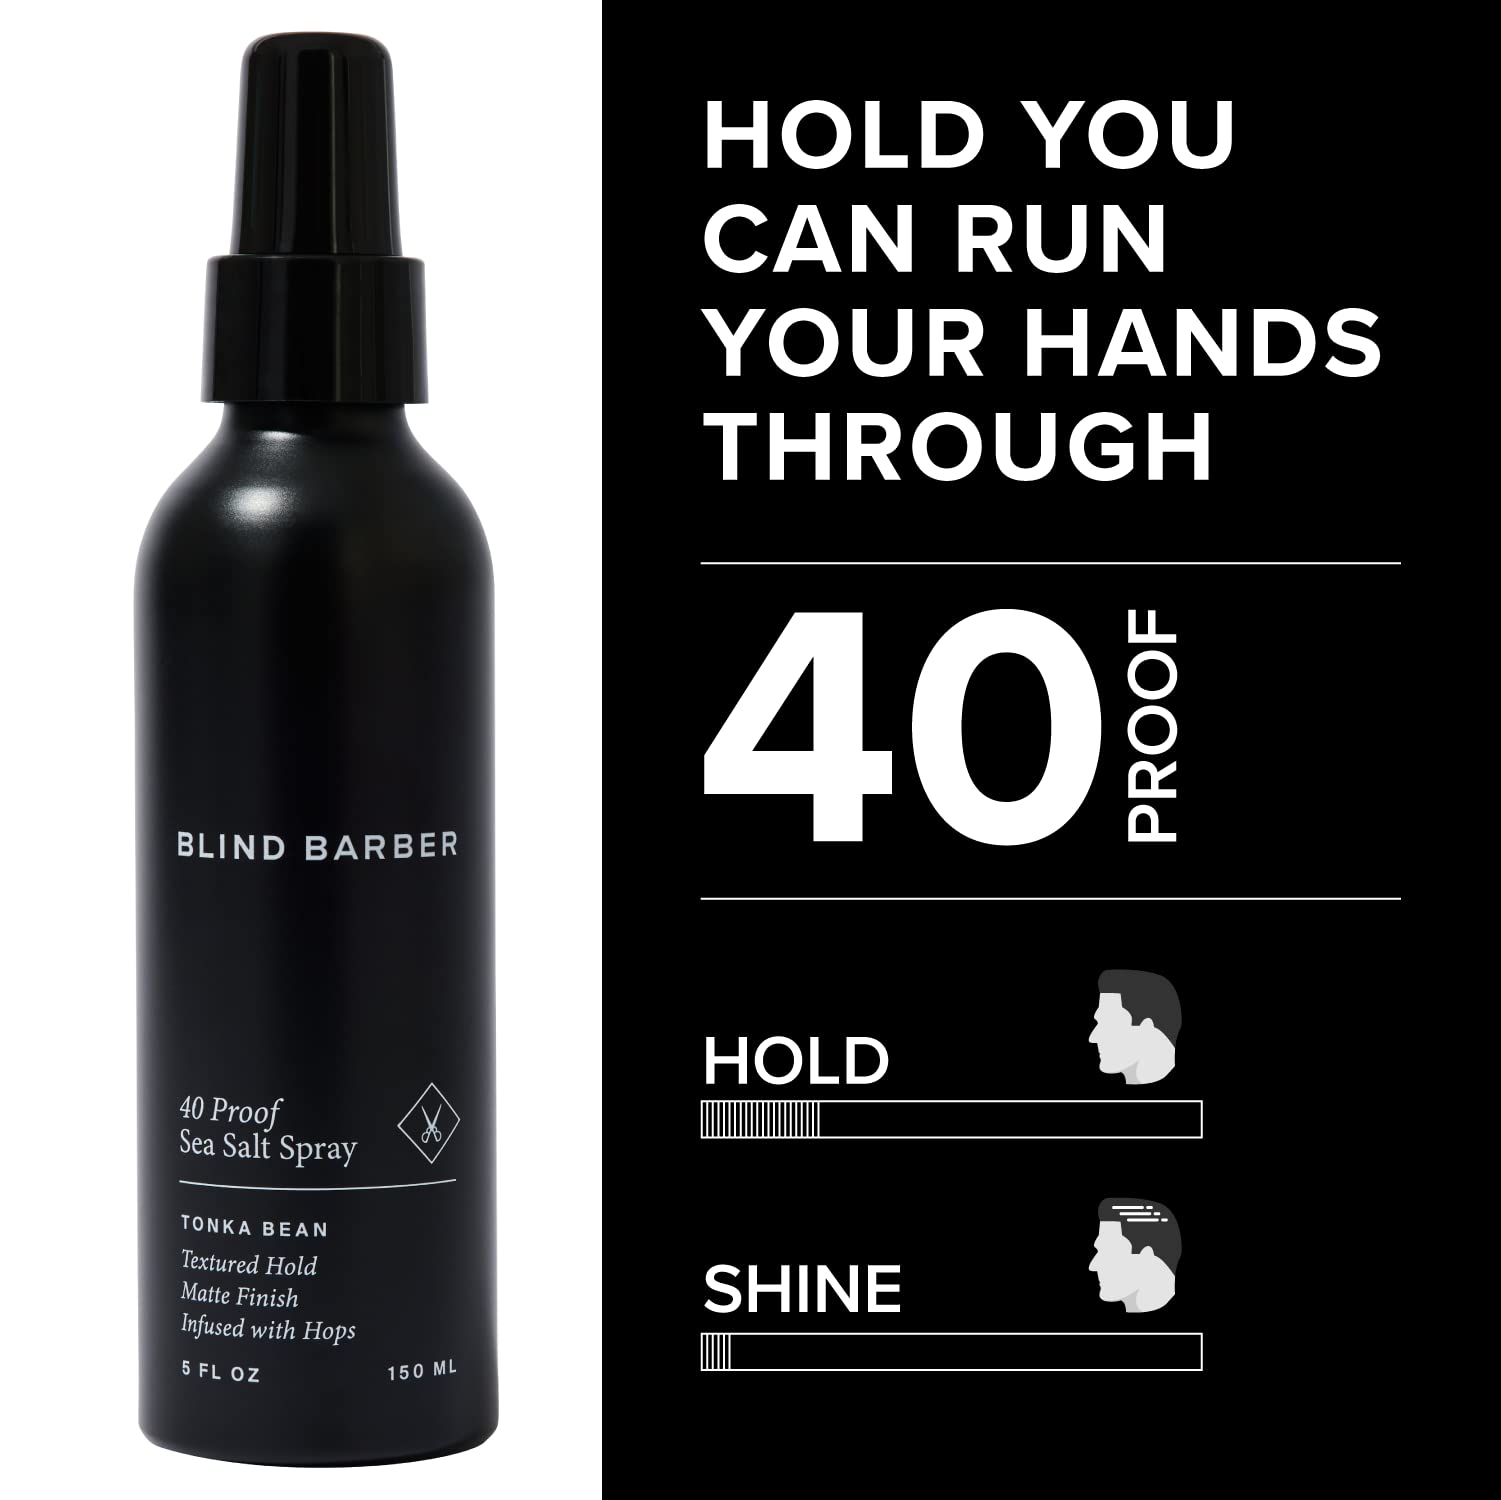 Blind Barber 40 Proof Sea Salt Spray - Volumizing Texture Spray for Off-The-Beach Hair Waves & Matte Natural Finish - Water Based Styling Mist for Men (6oz / 180ml)